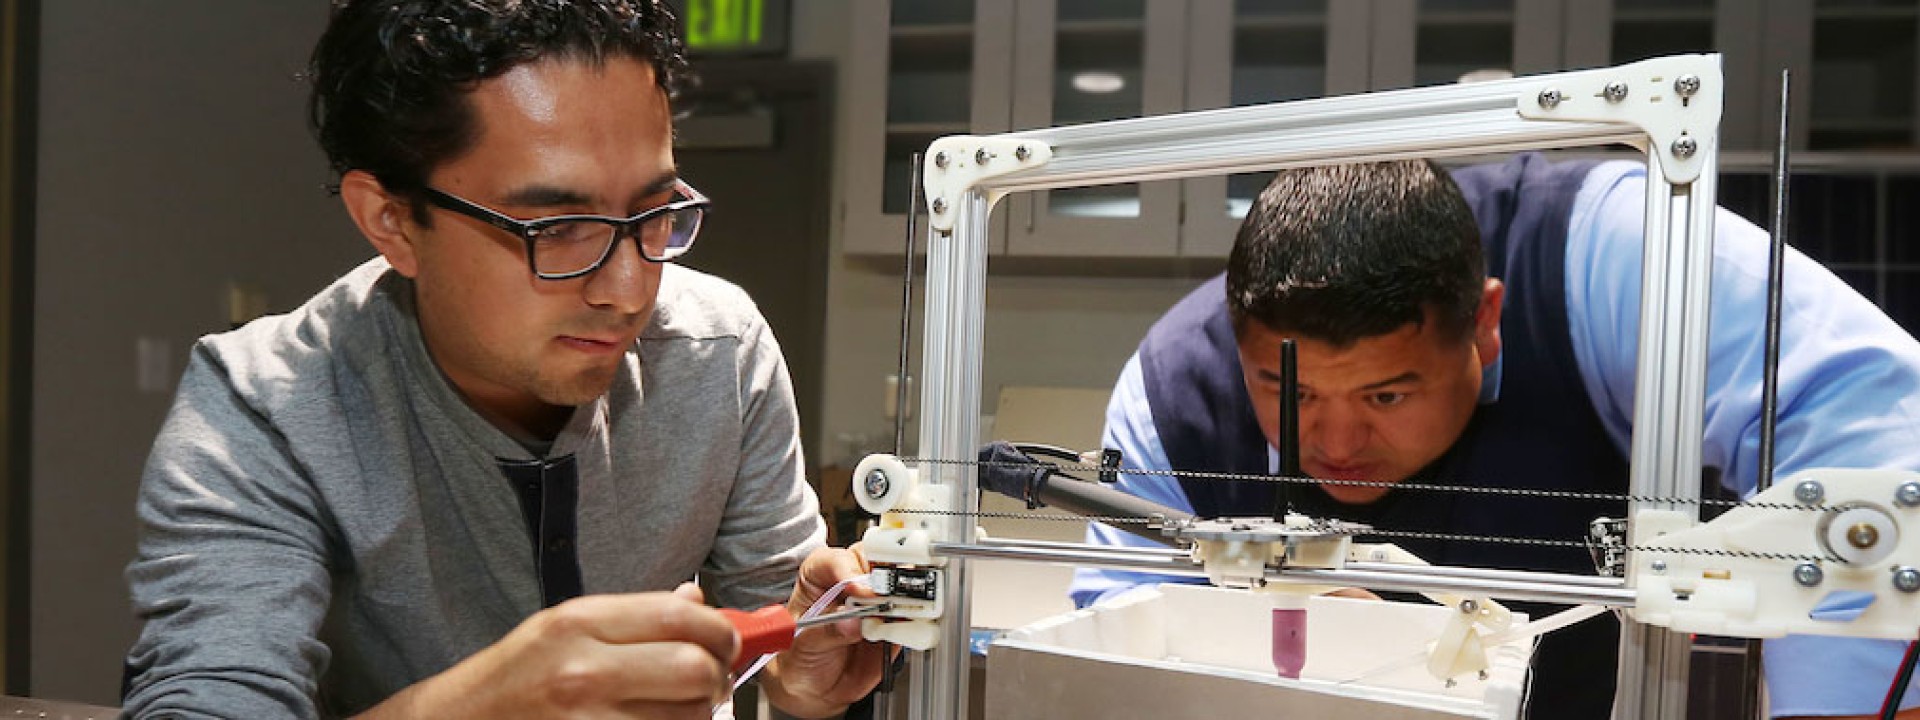 Image of two engineering students looking at a metal frame device intently. 